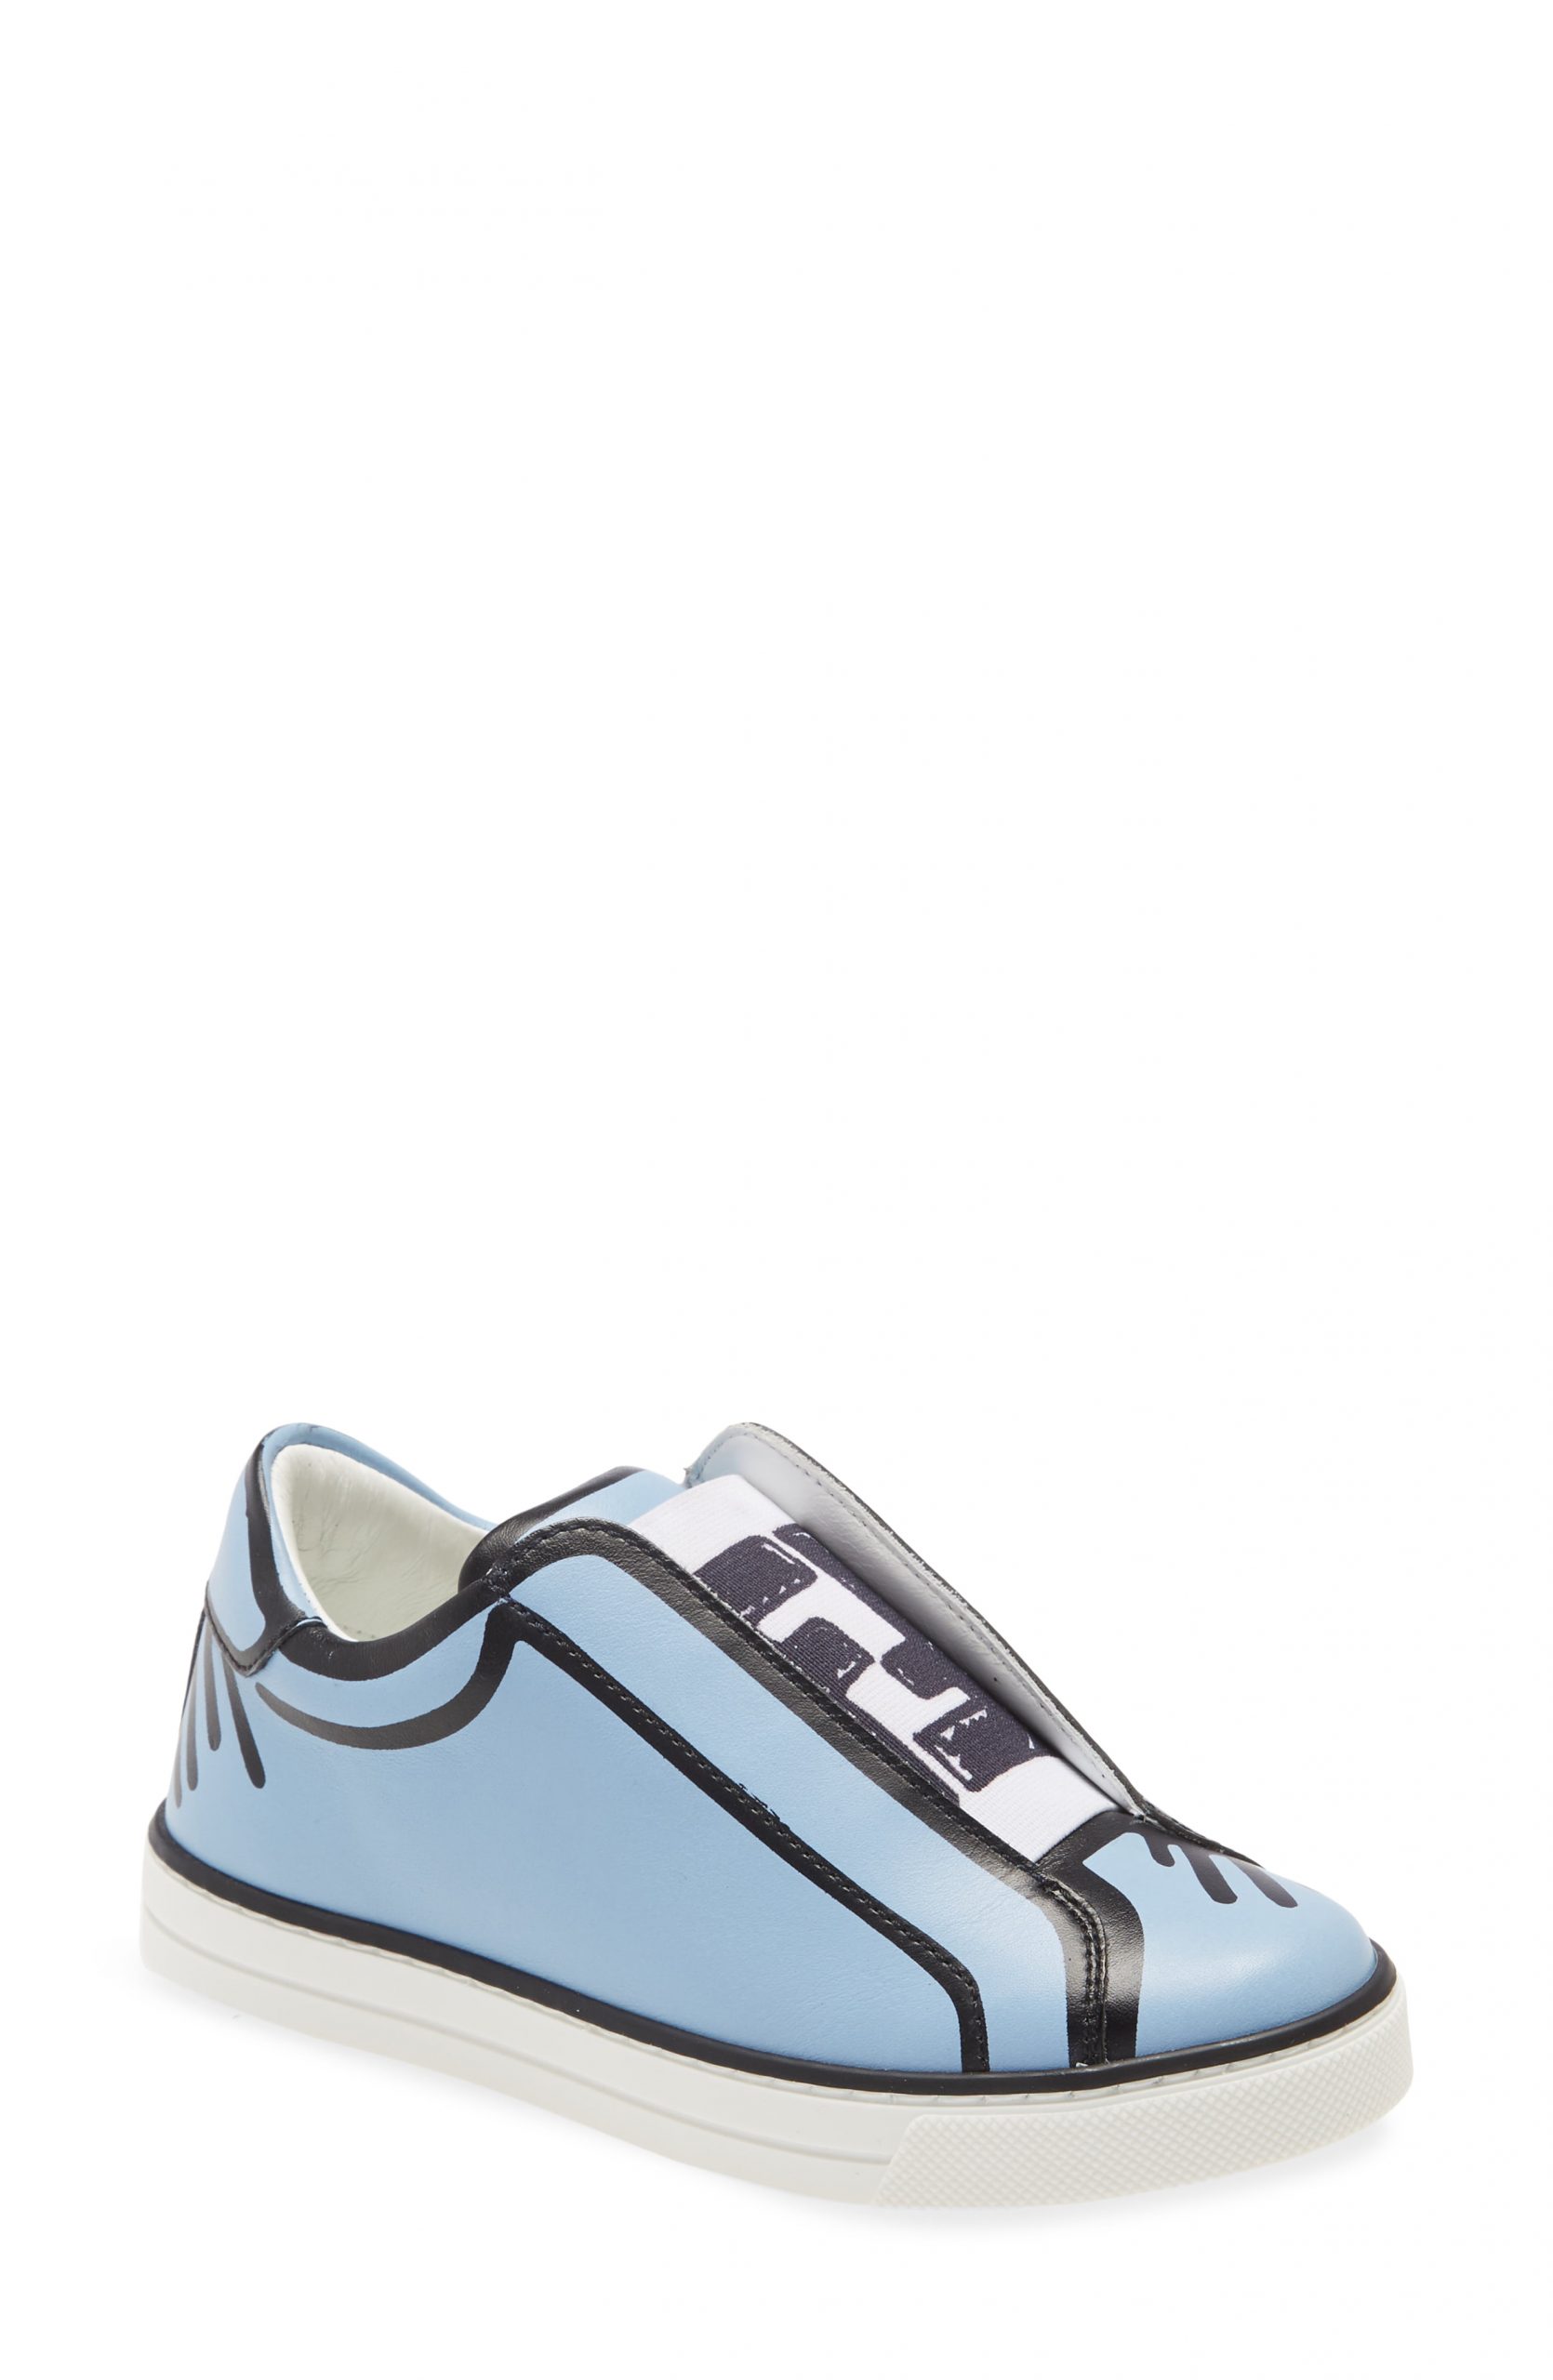 fendi sneakers for toddlers